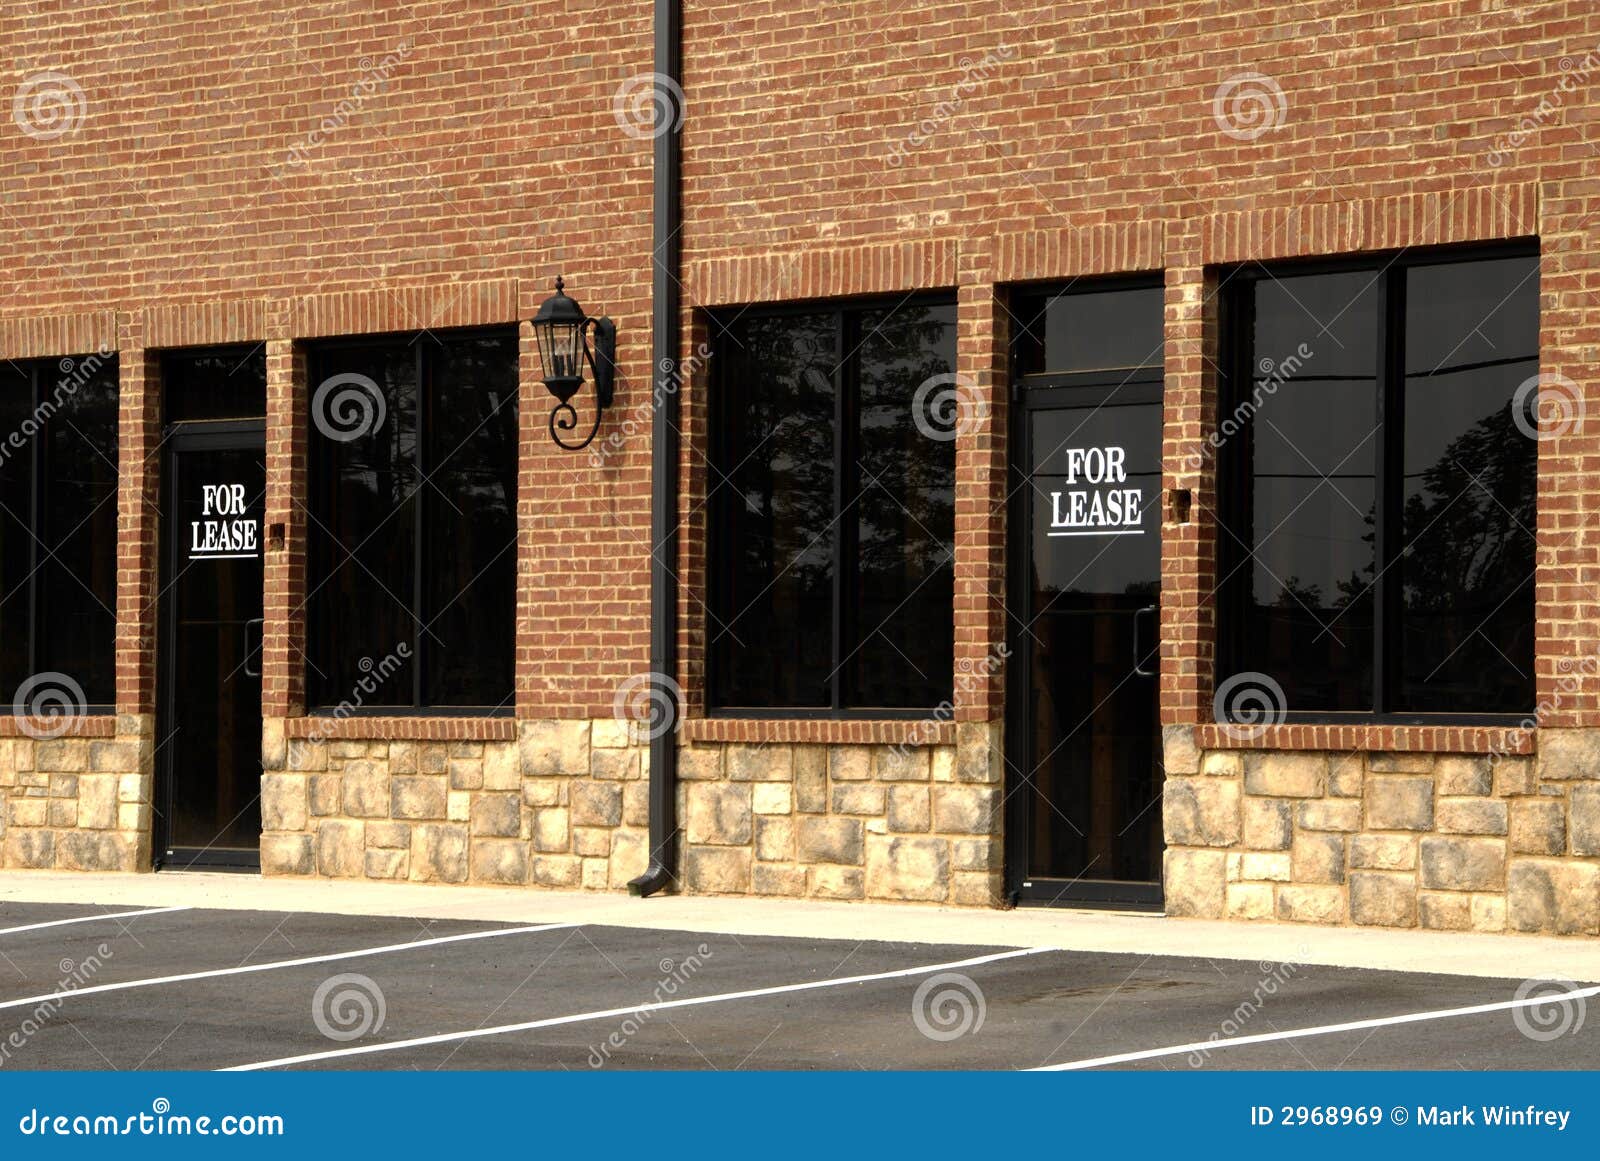 for lease - commercial space